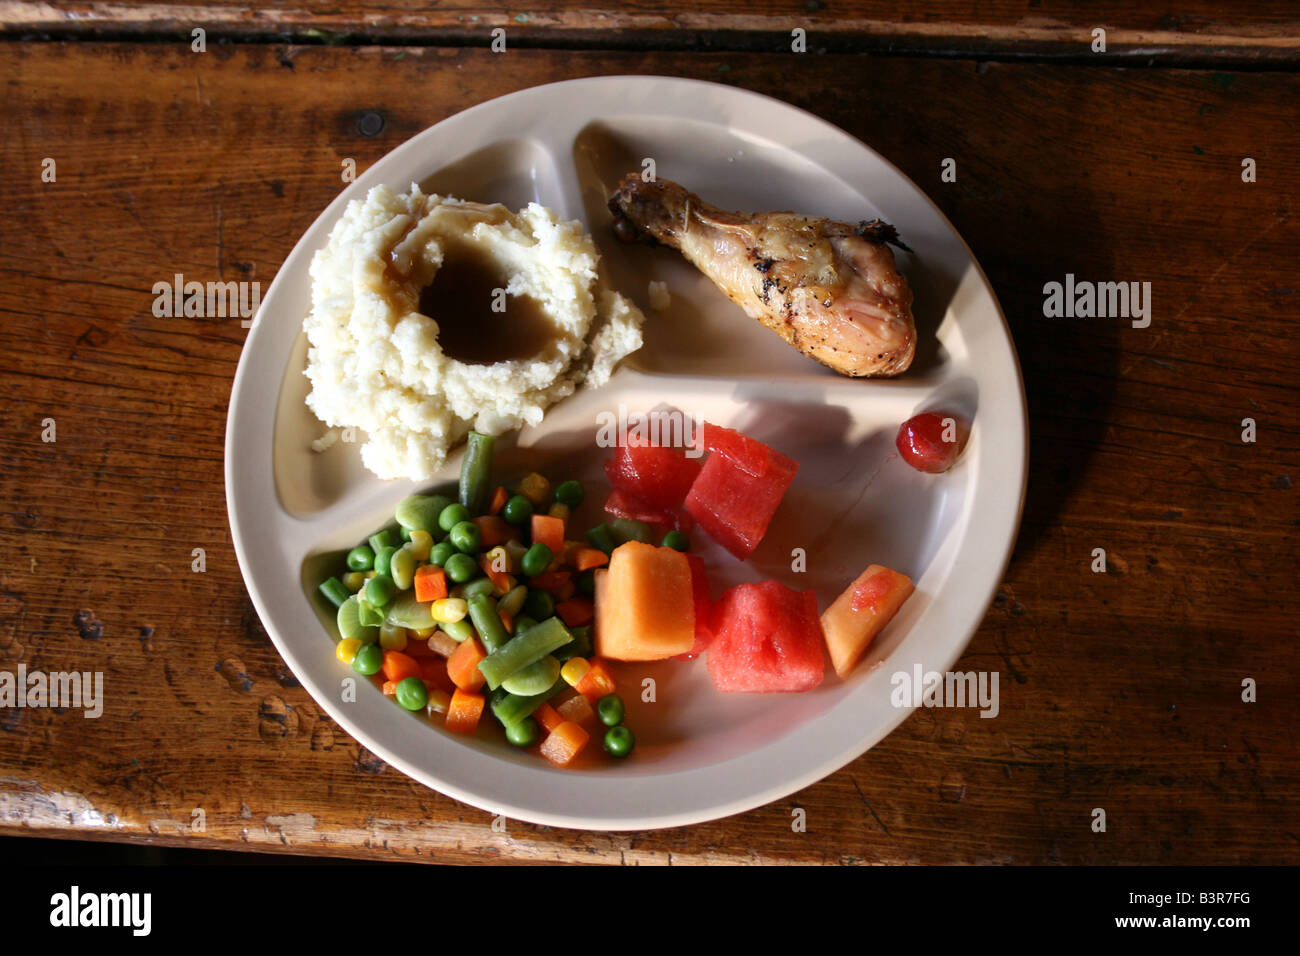 food in cafeteria, plate of dinner food, balanced meal, fruit salad,  chicken leg, mashed potatoes, vegetables Stock Photo - Alamy